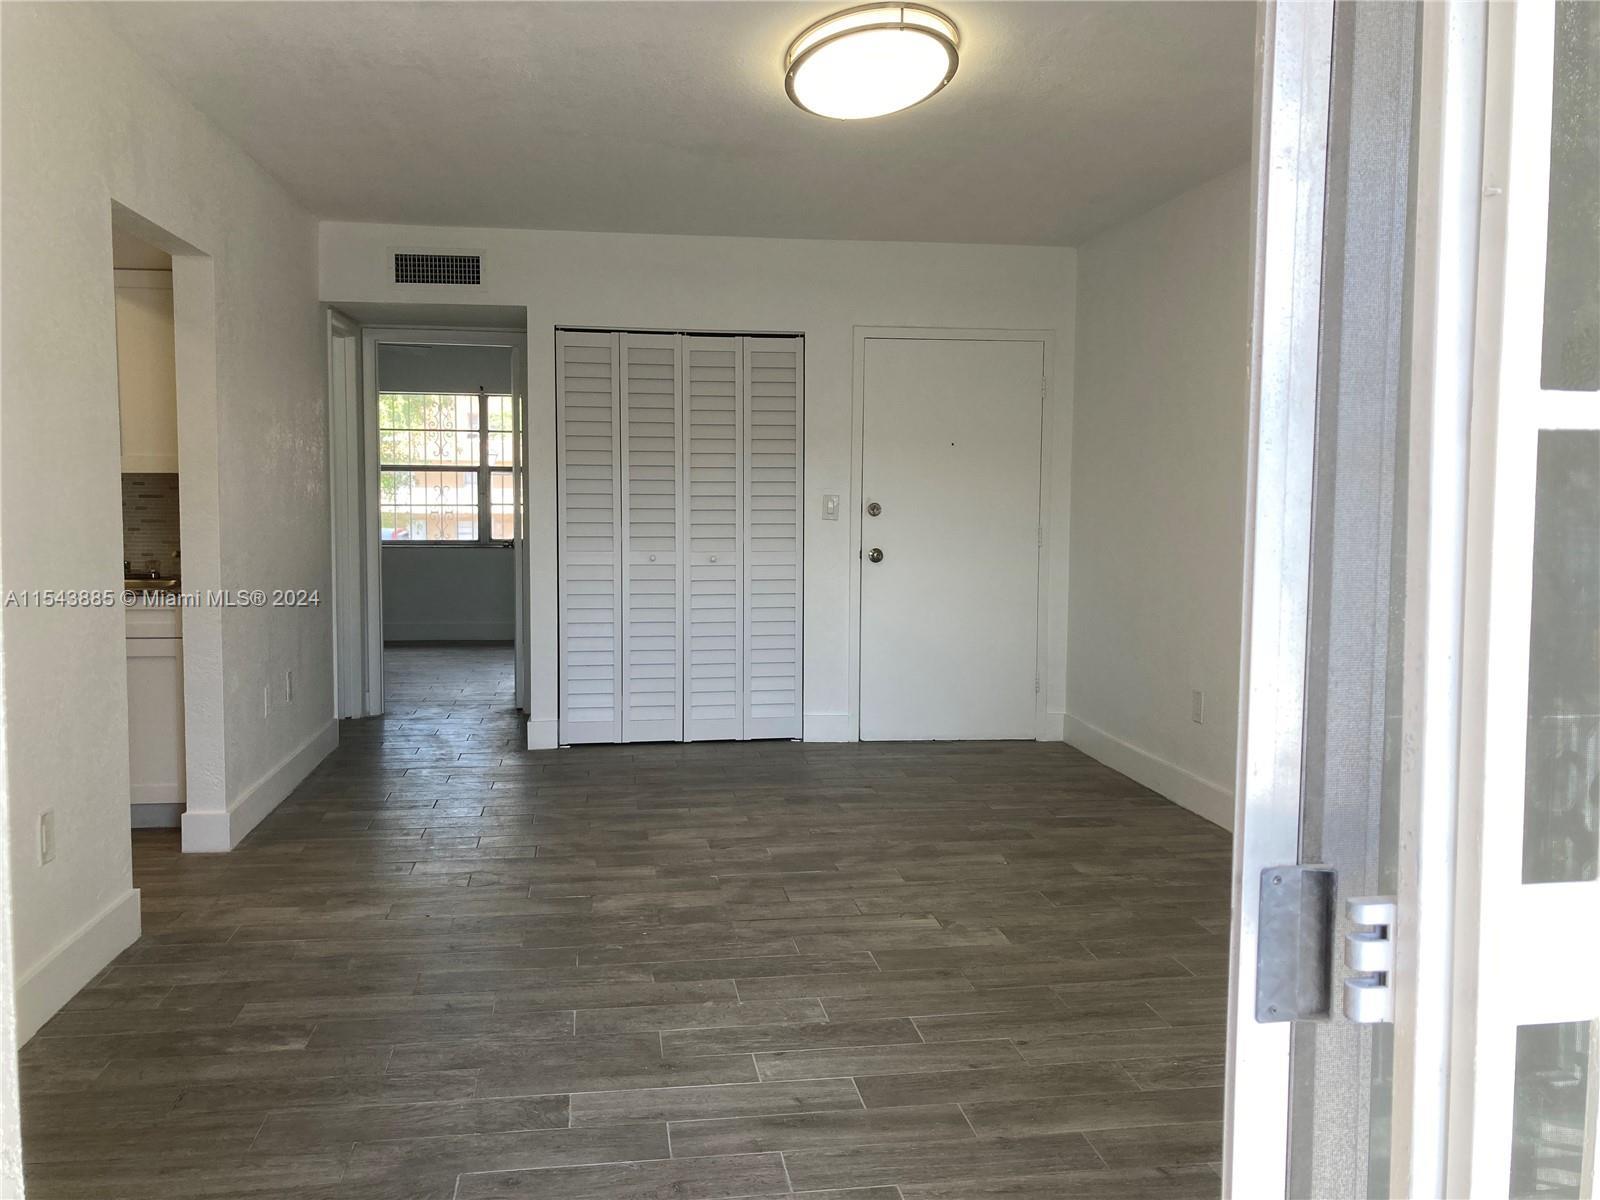 Photo of 210 NW 107th Ave #208 in Miami, FL